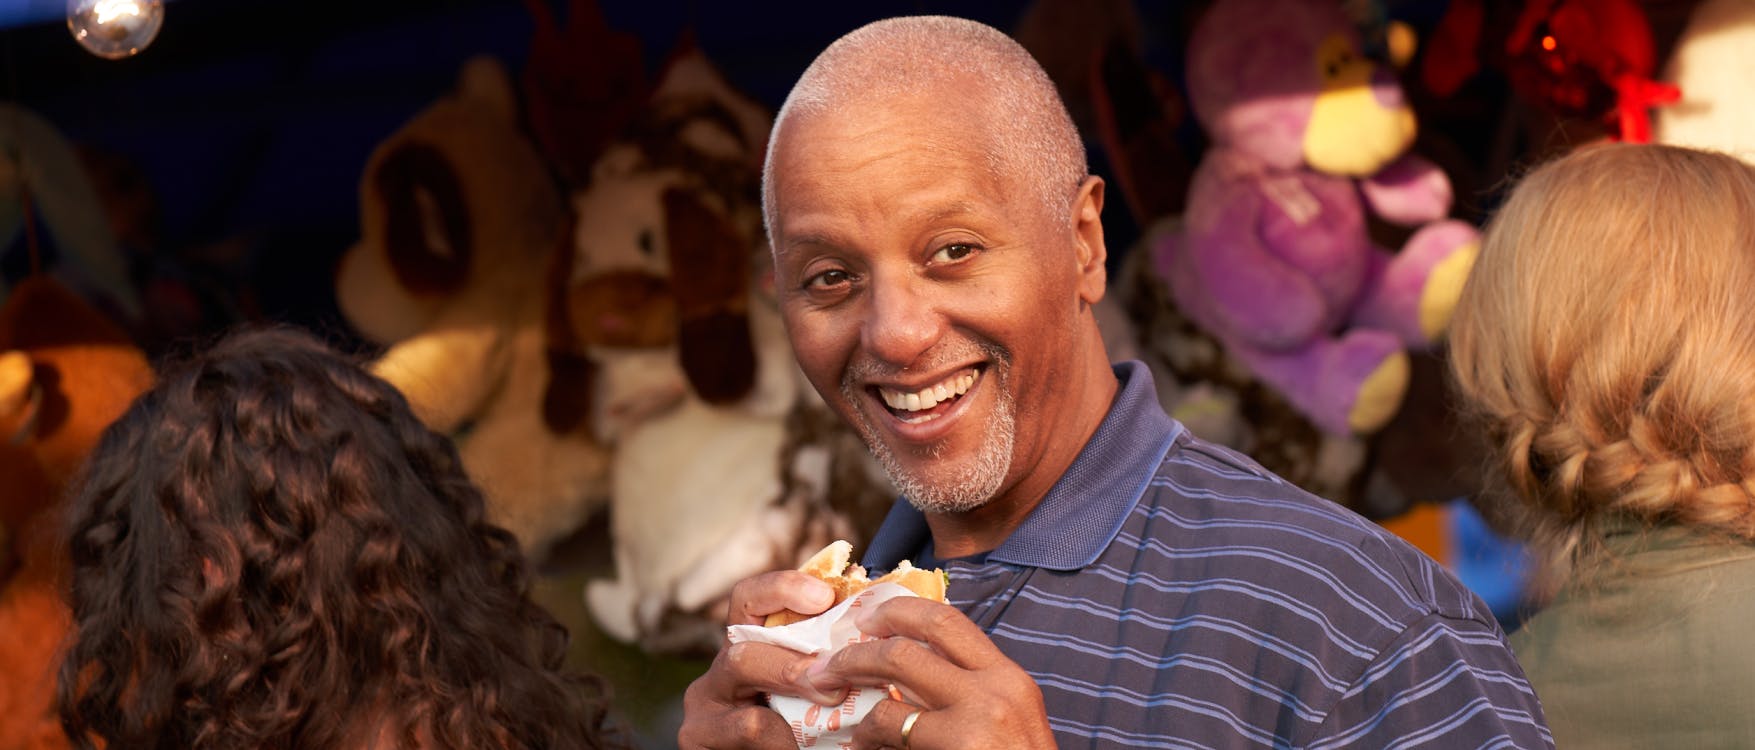 Smiling man holding a partly eaten burger at a town carnival